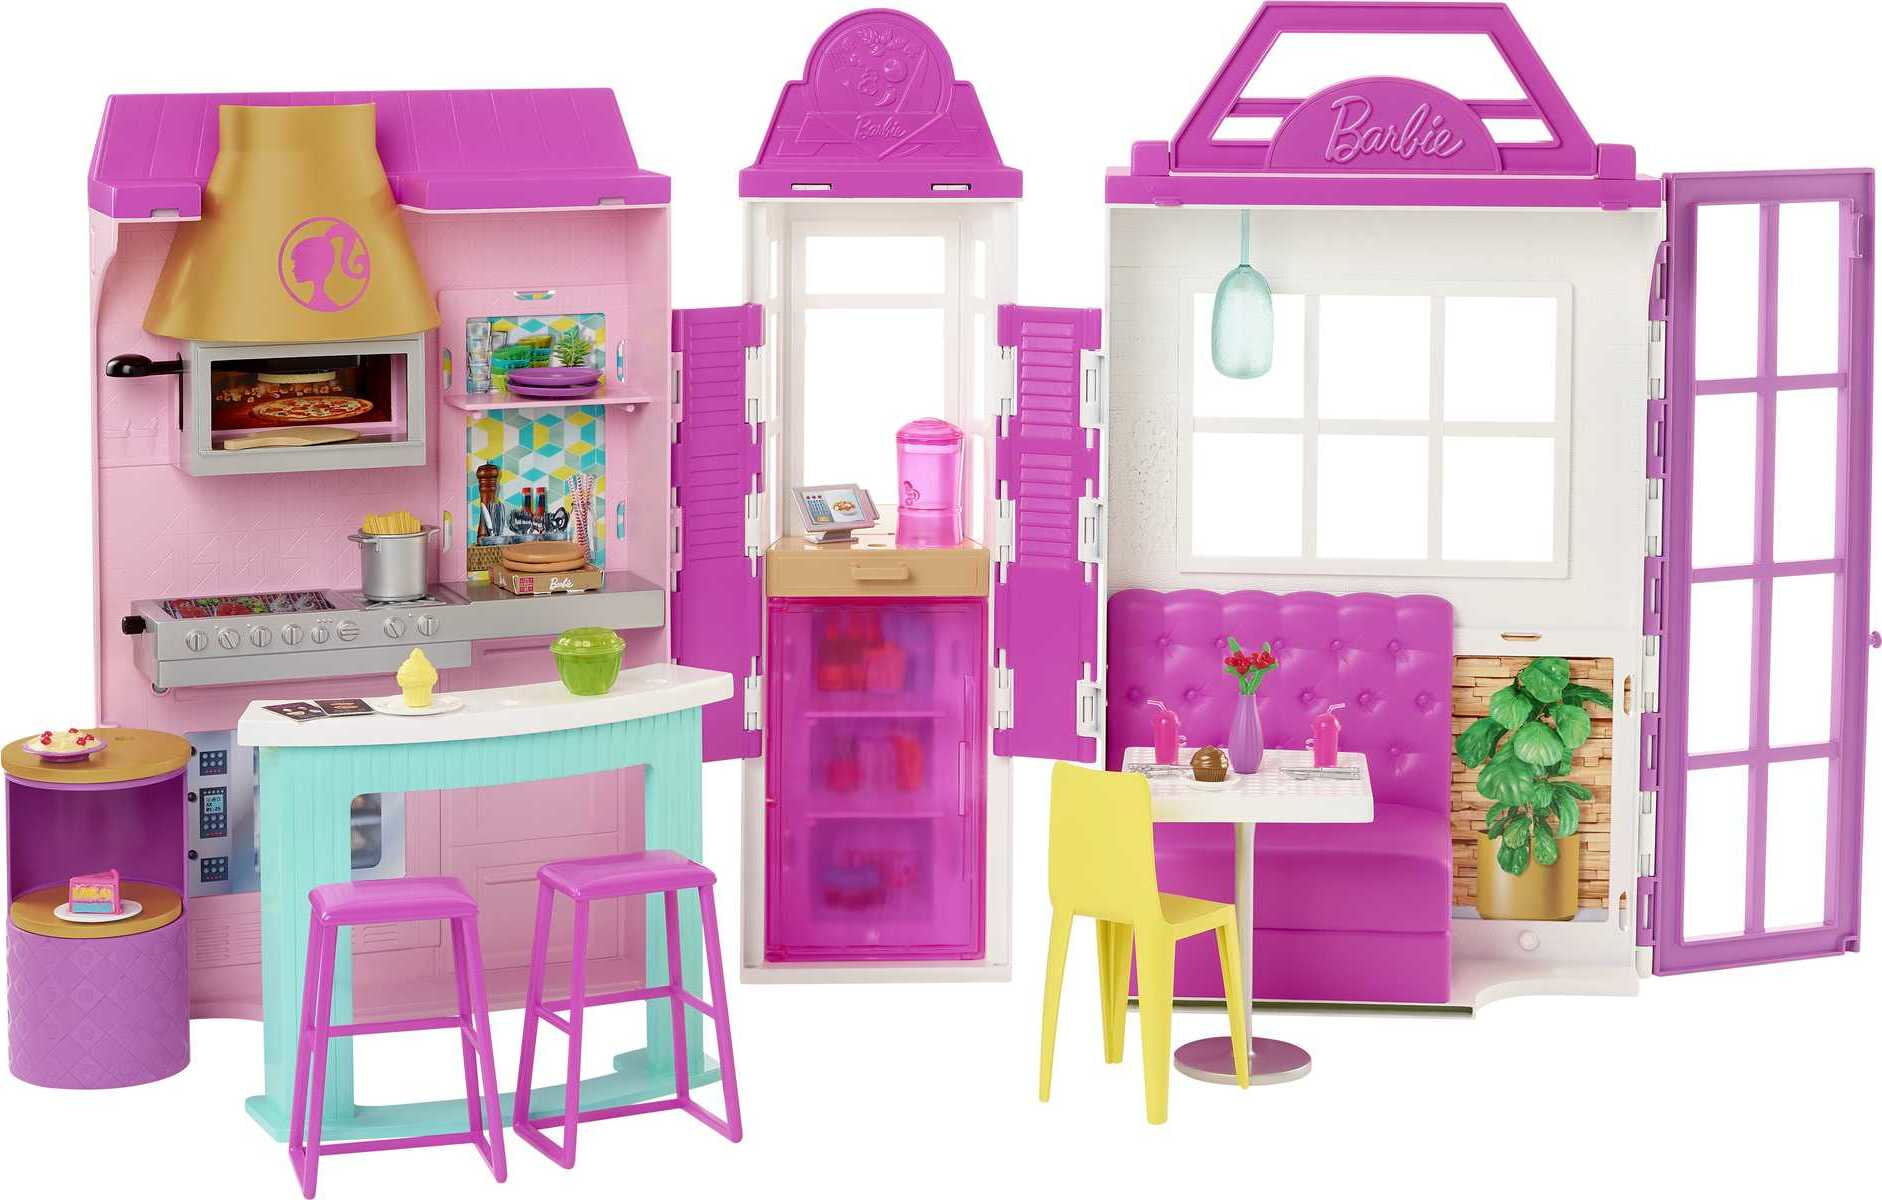 Ages 3+ Just Play Barbie Kitchen Pastry Play Set 13 Pieces